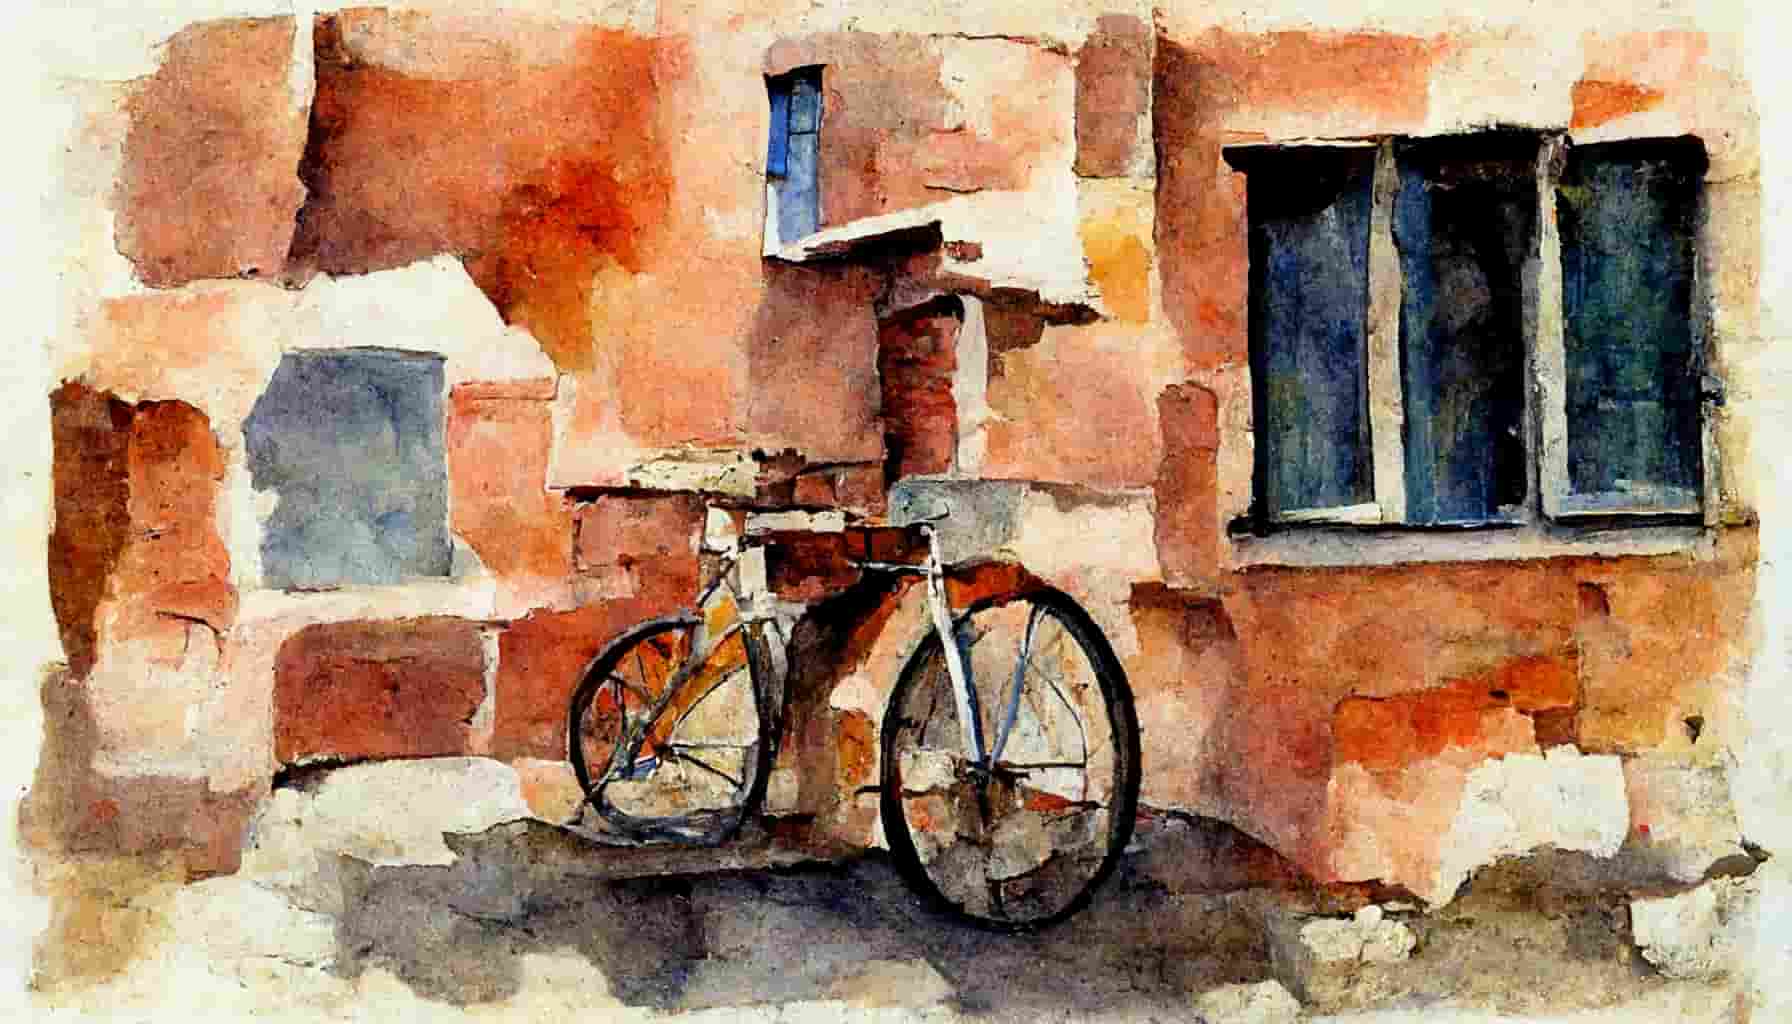 Watercolor a bicycle leaning against a brick building